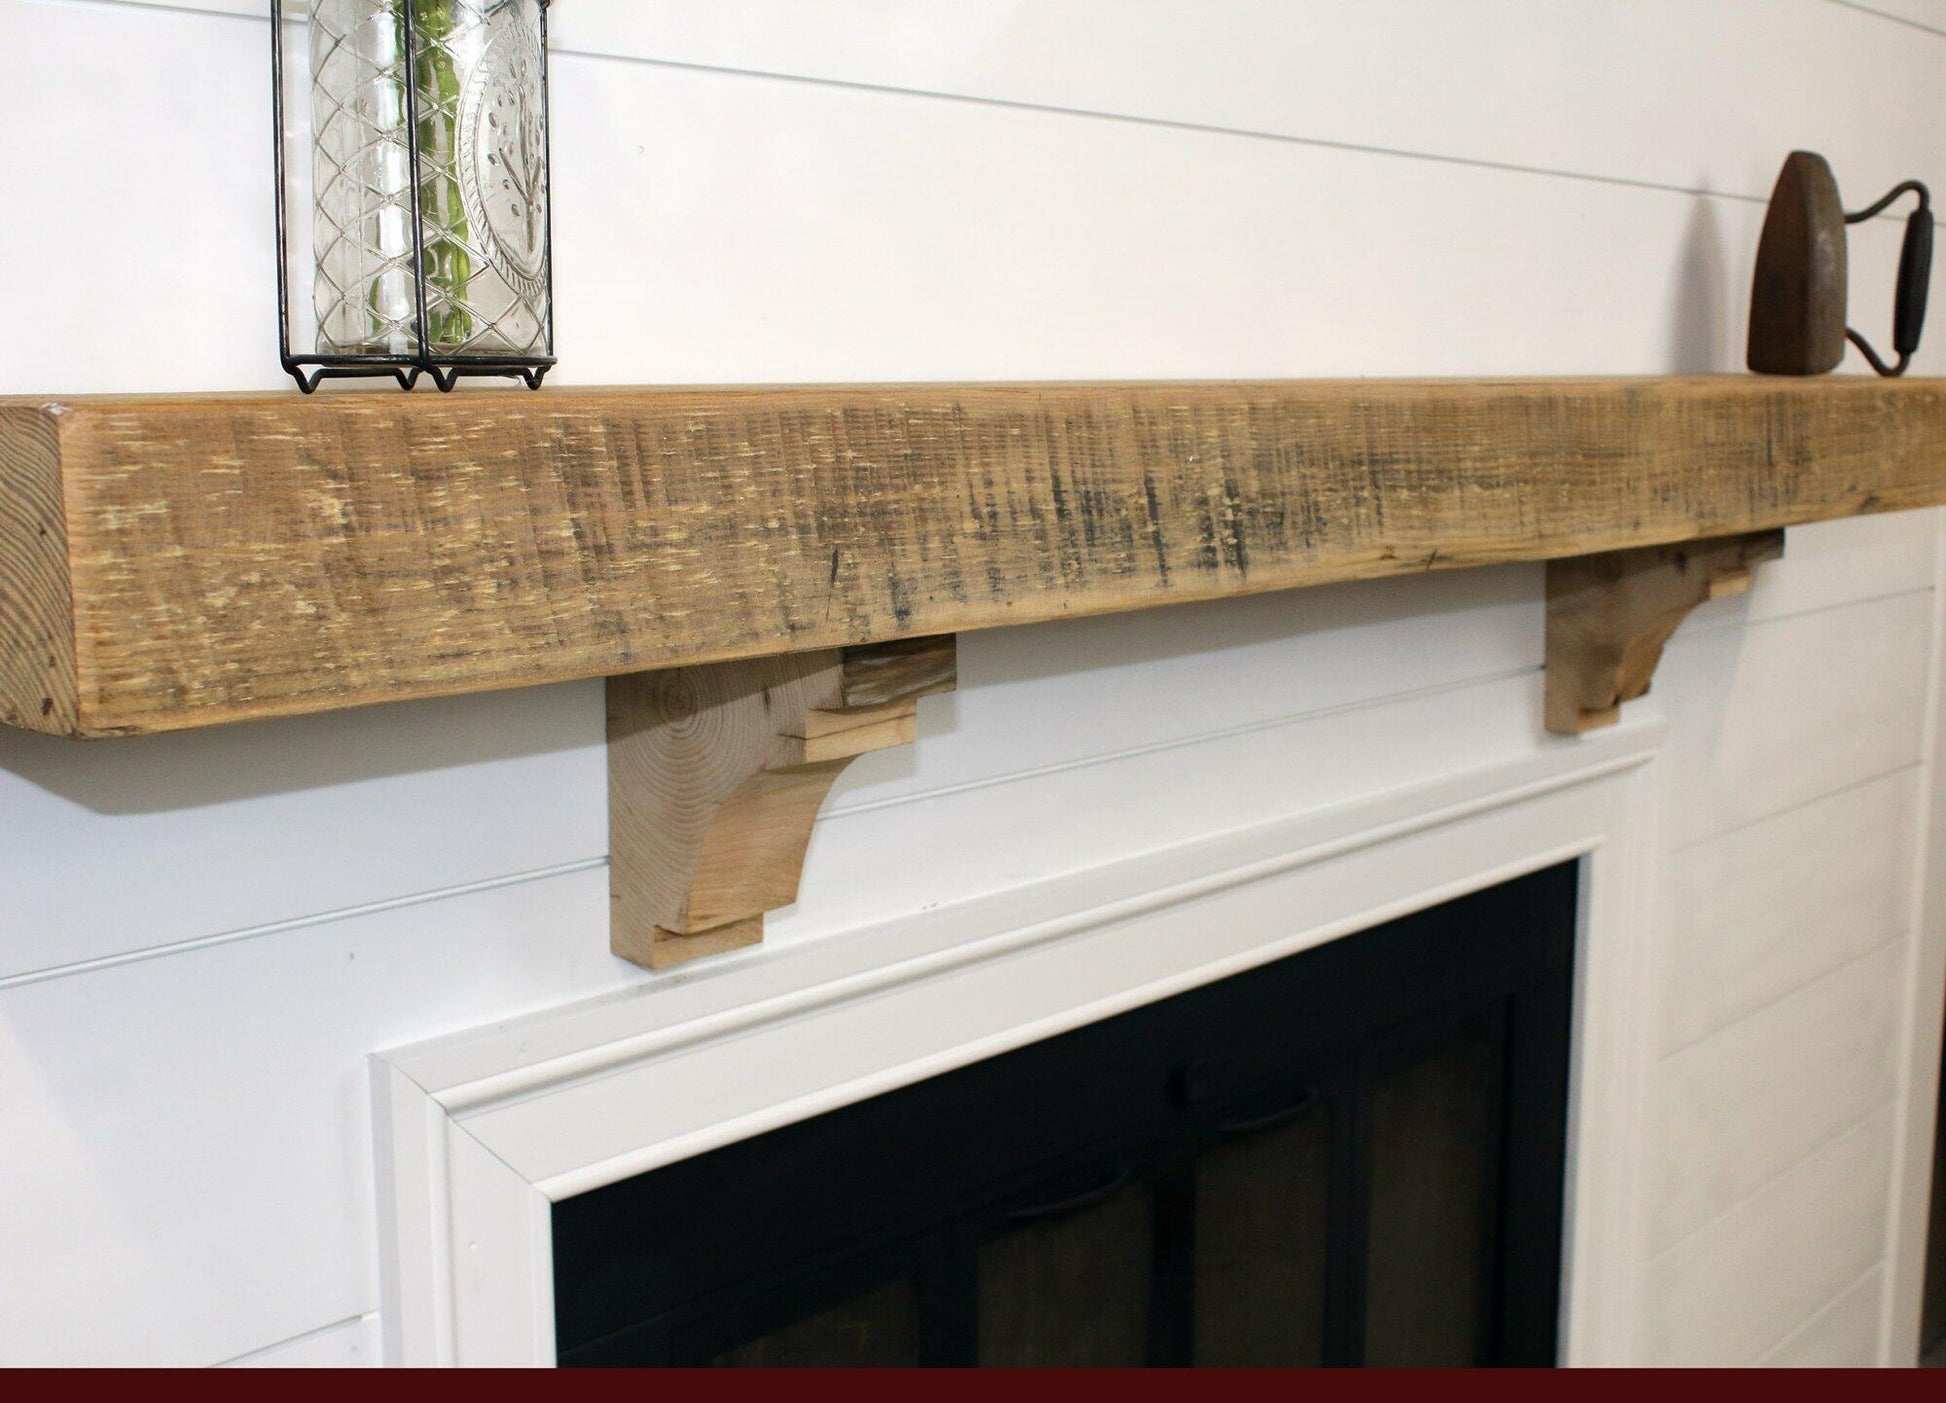 a close up of a reclaimed wood floating fireplace mantel in the natural option. The mantel has matching corbels shown underneath and has prominent saw markings in the face.